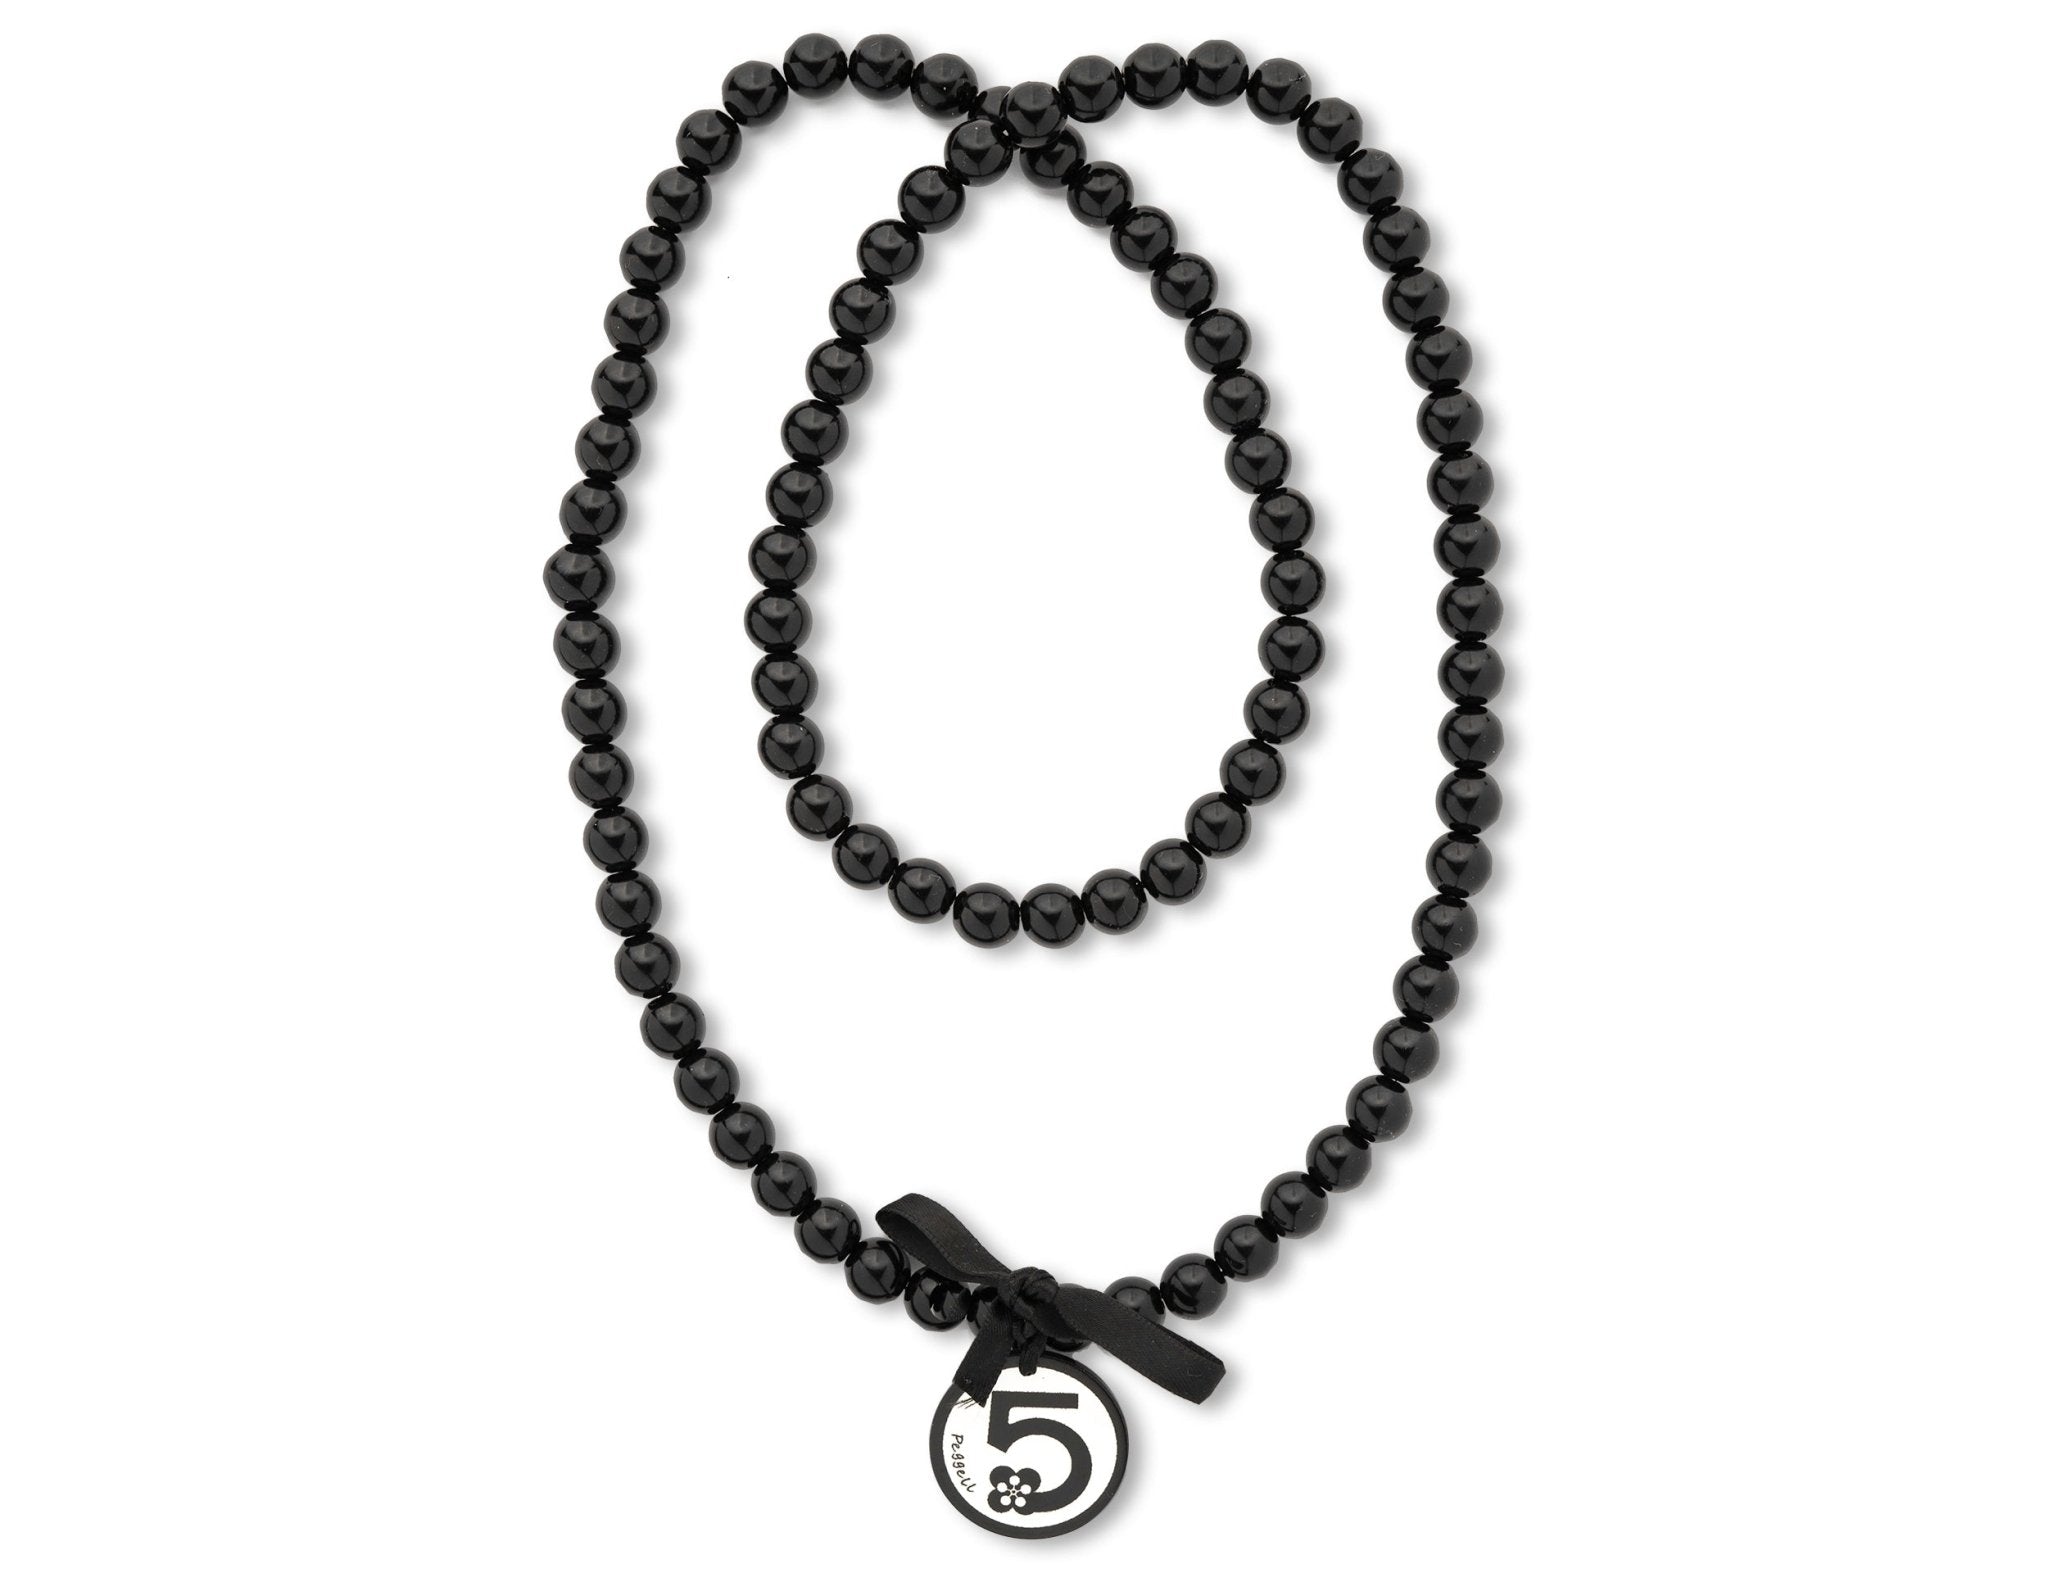 Black pearl necklace nr5 - Peggell